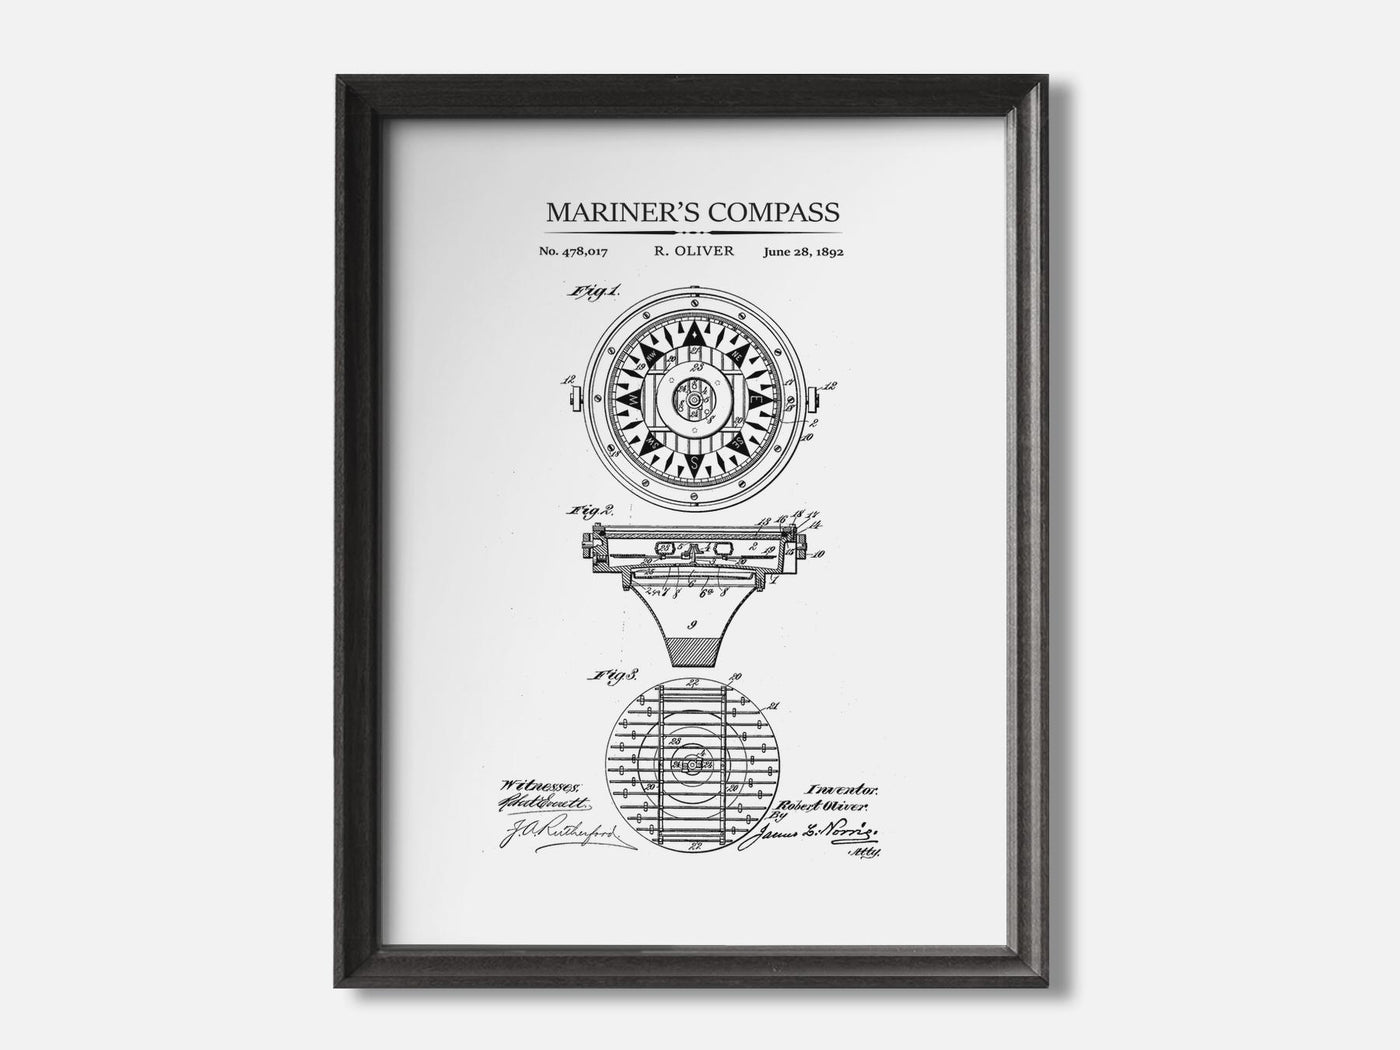 Mariner's Compass Patent Print mockup - A_to5-V1-PC_F+B-SS_1-PS_5x7-C_whi variant